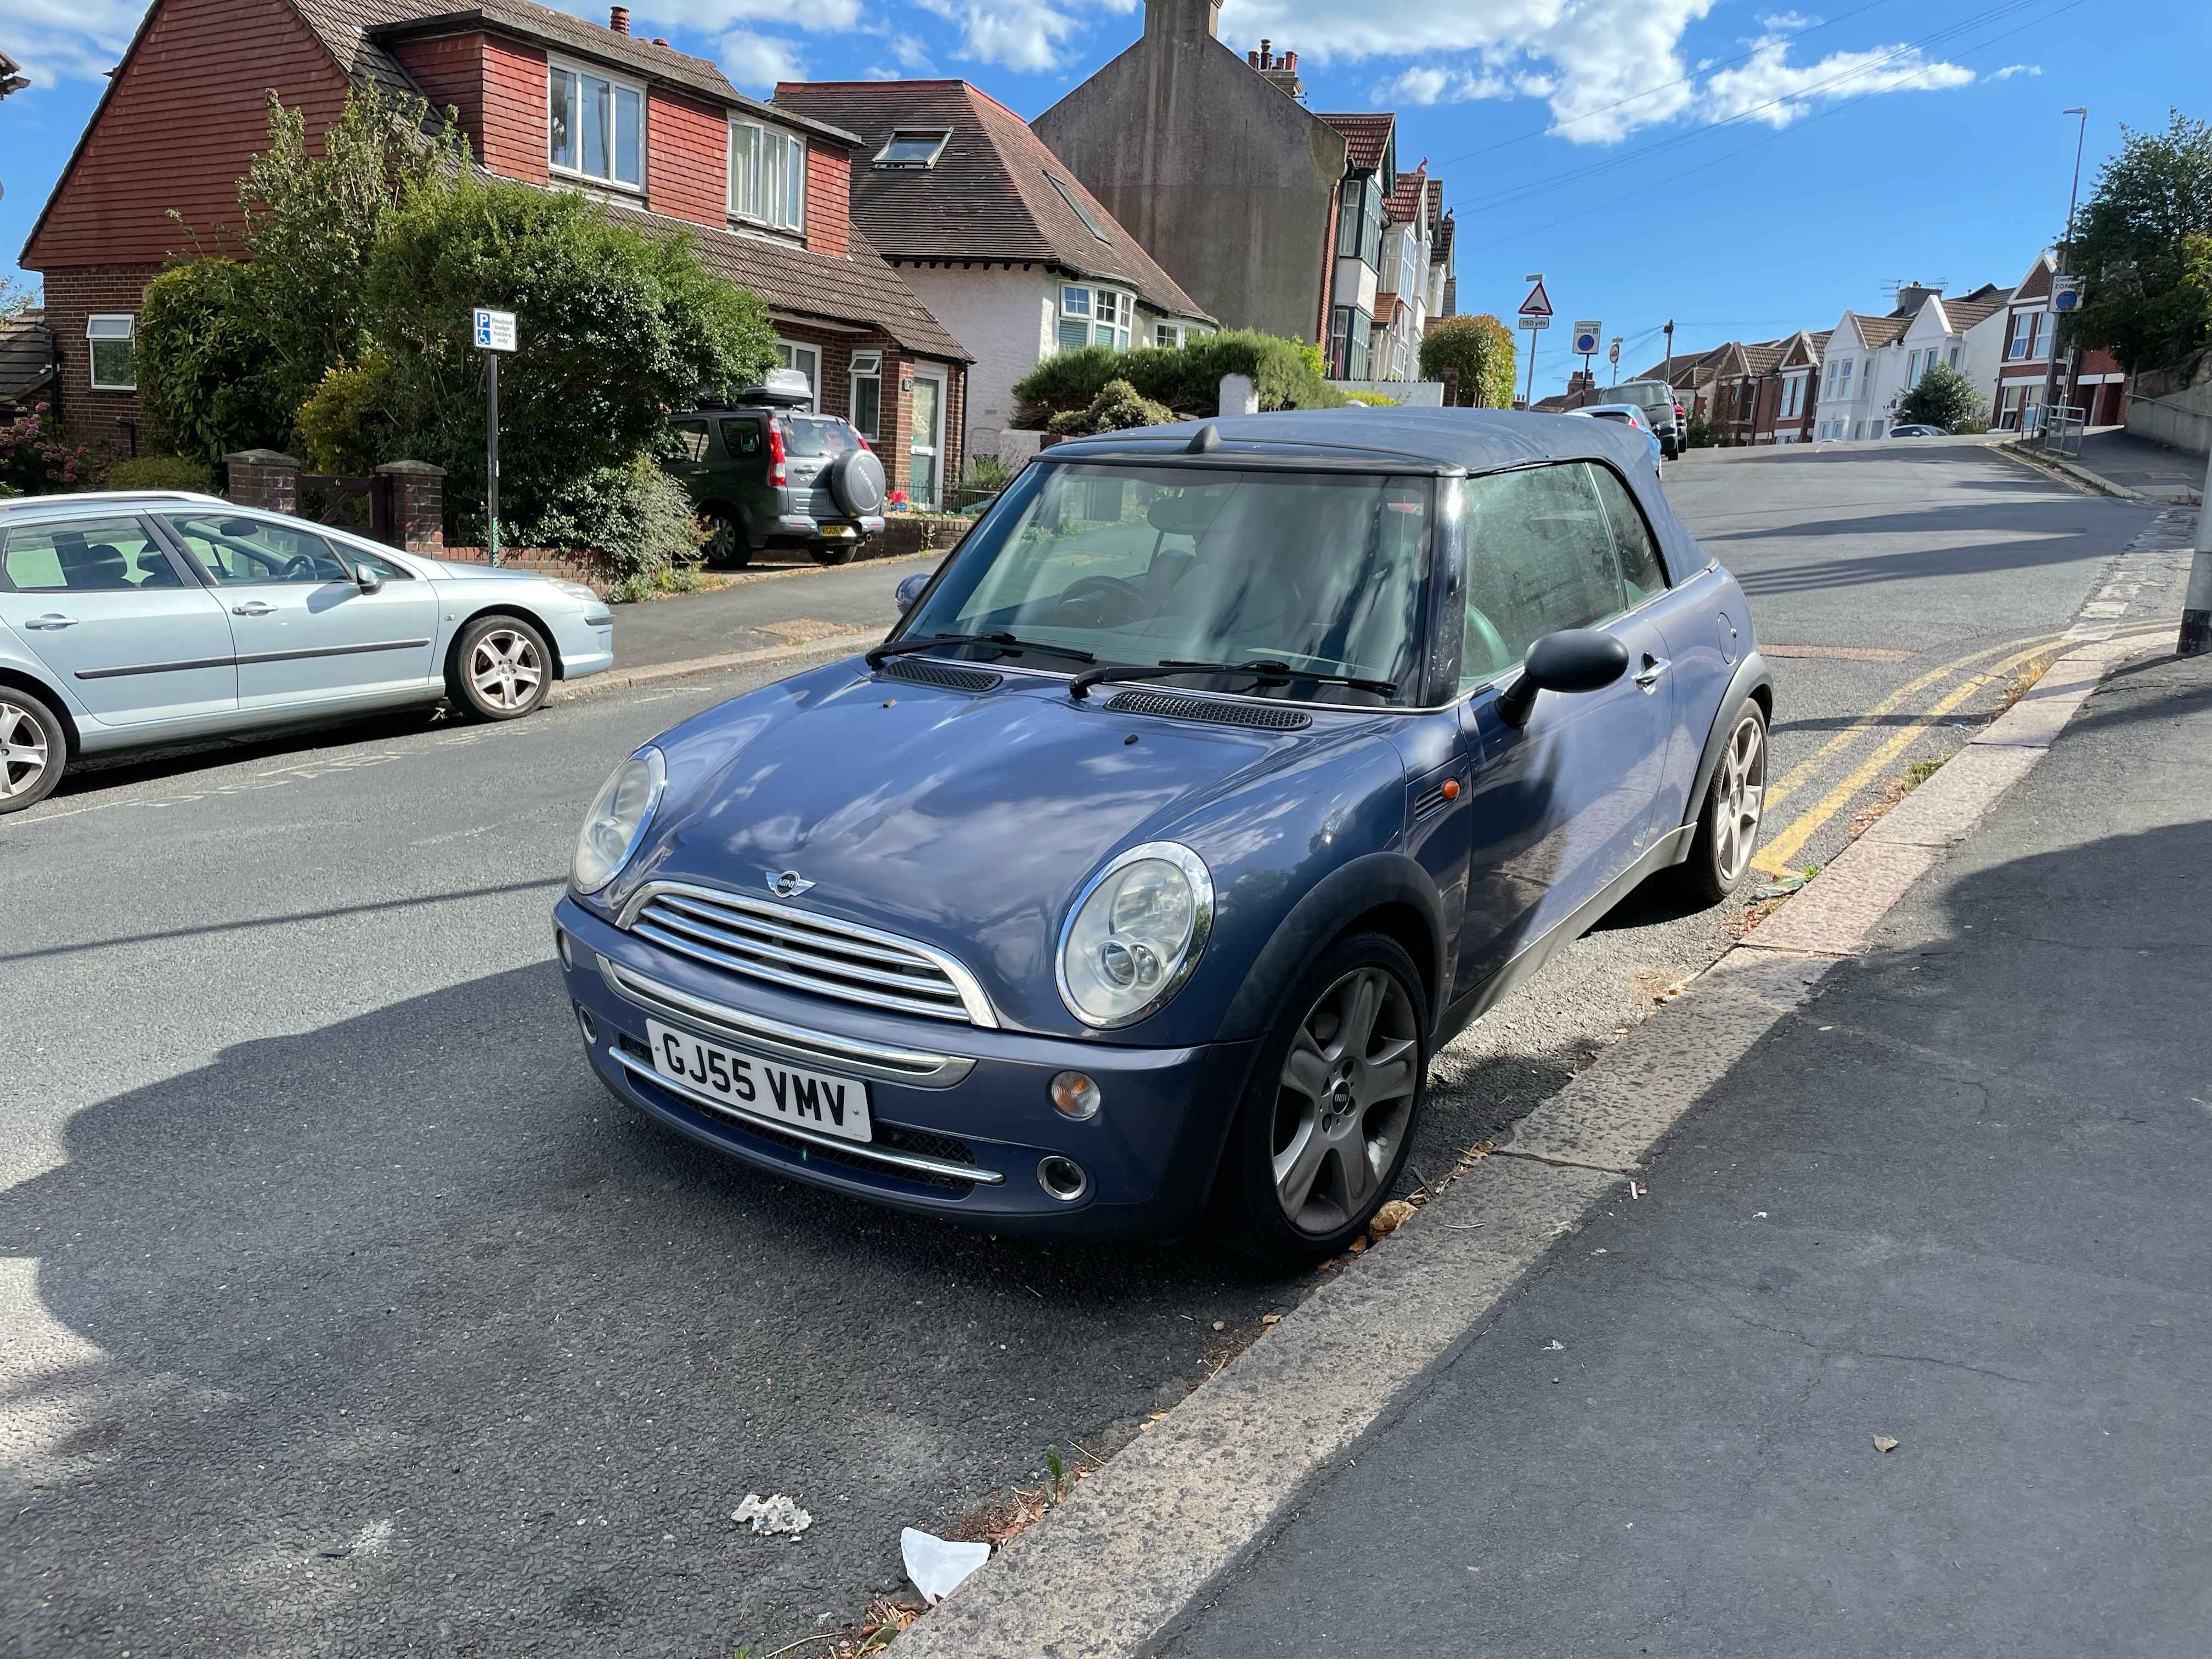 Photograph of GJ55 VMV - a Blue Mini Cooper parked in Hollingdean by a non-resident, and potentially abandoned. 